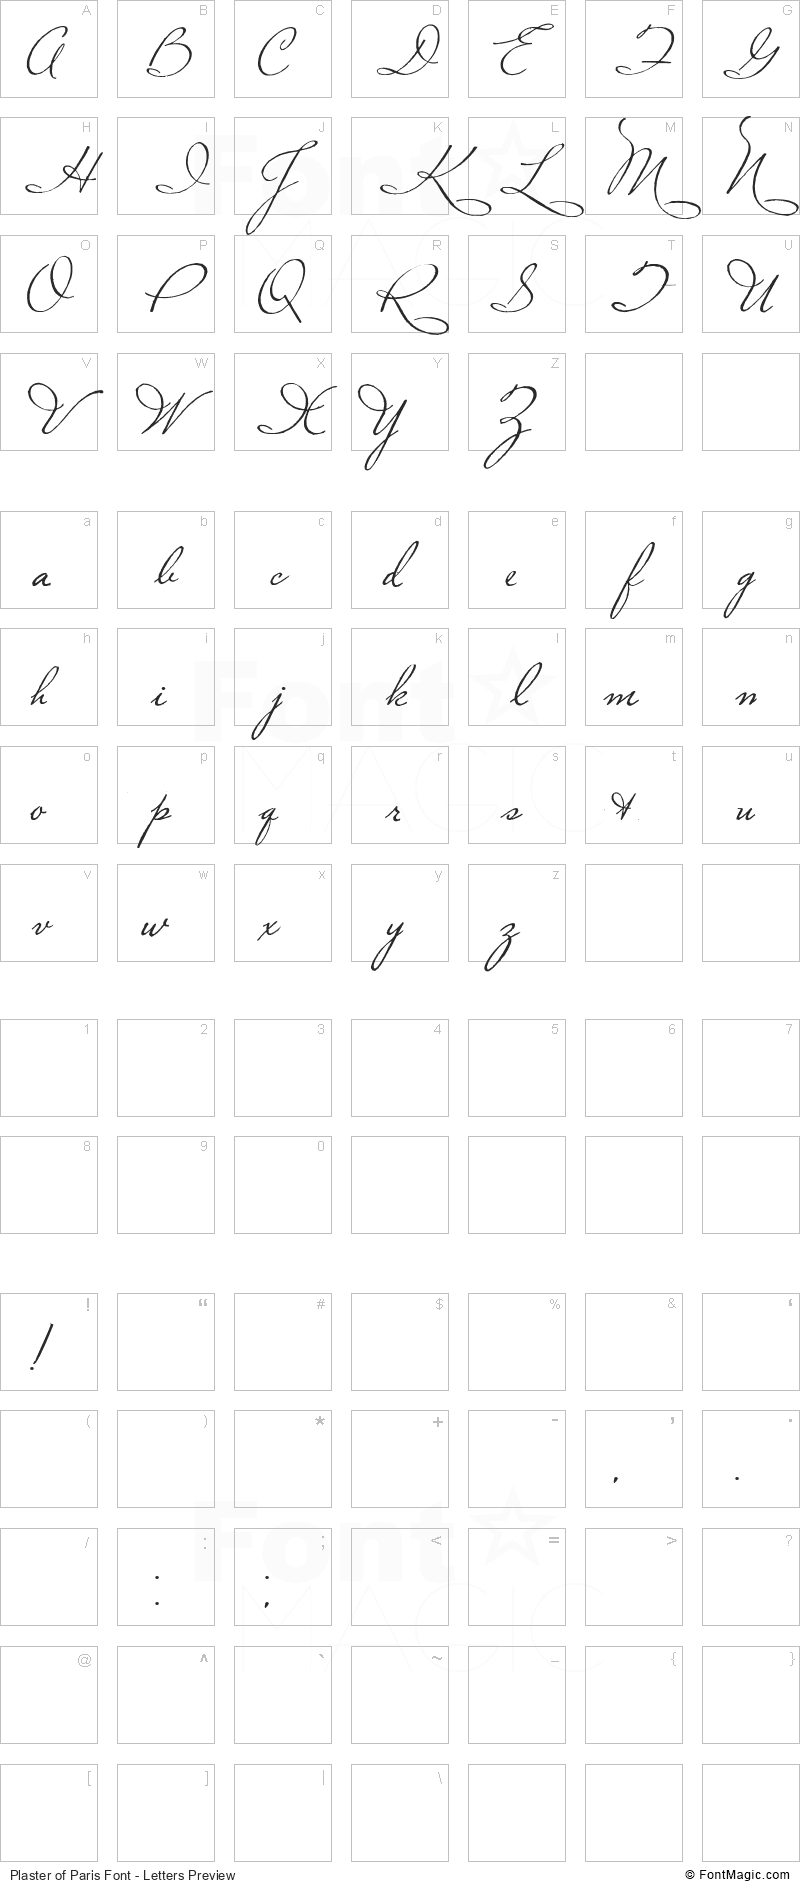 Plaster of Paris Font - All Latters Preview Chart